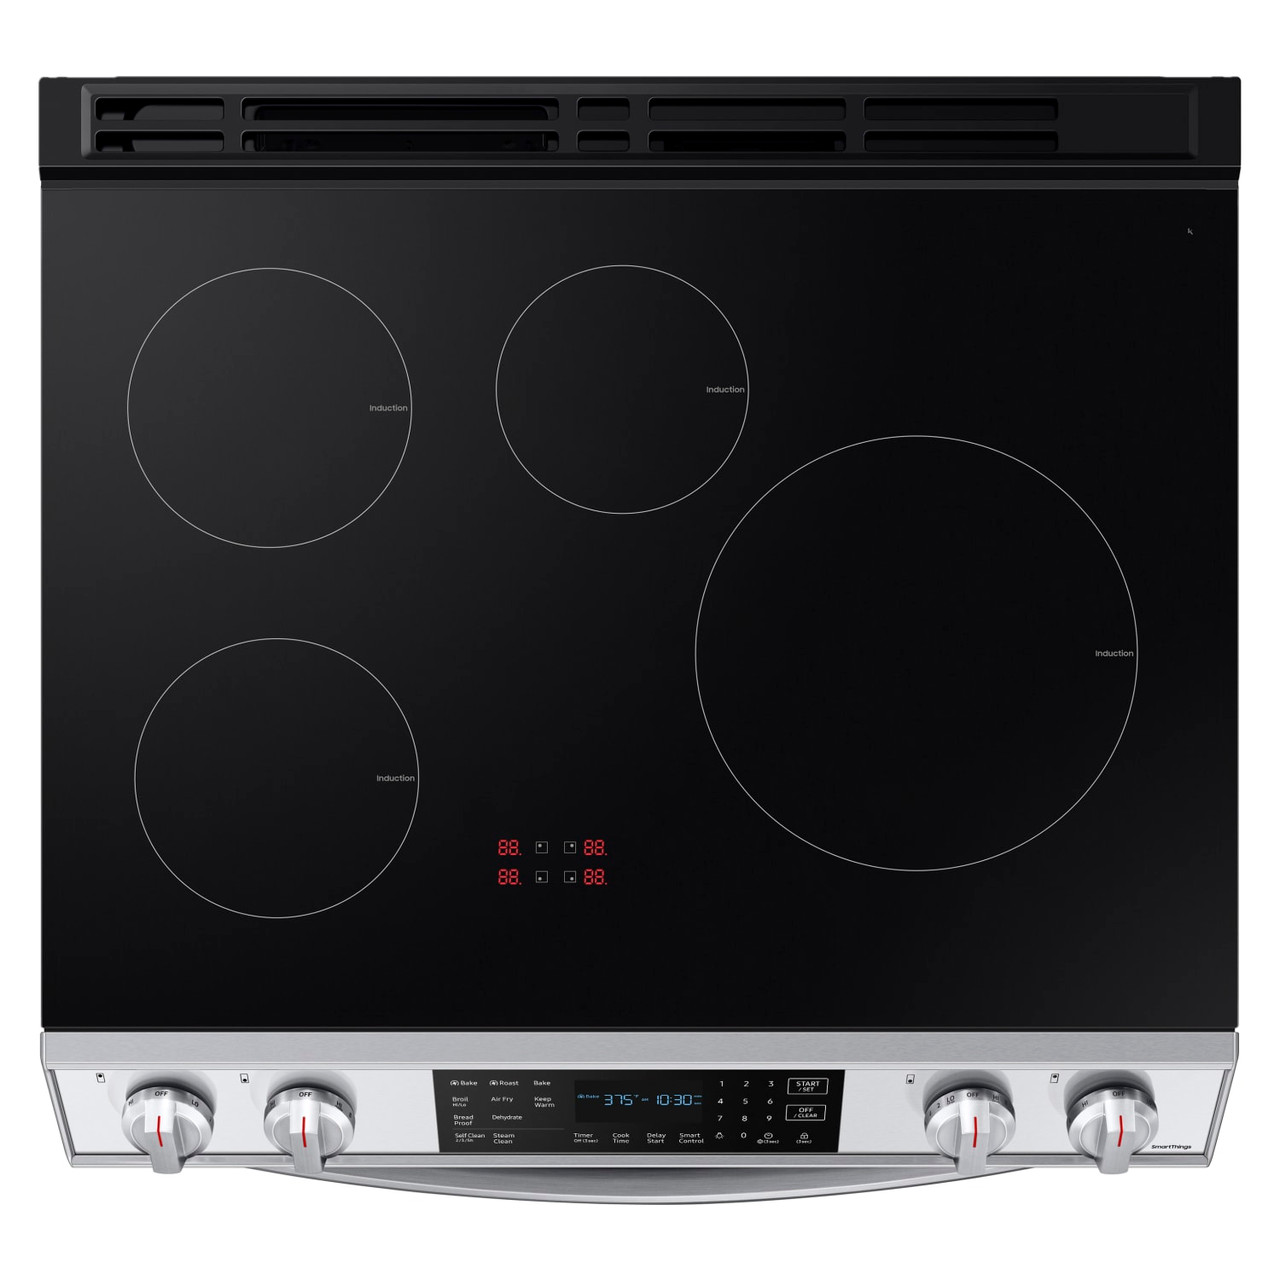 Samsung 6.3 cu. ft. Slide-In Induction Range with Air Fry - NE63B8611SS